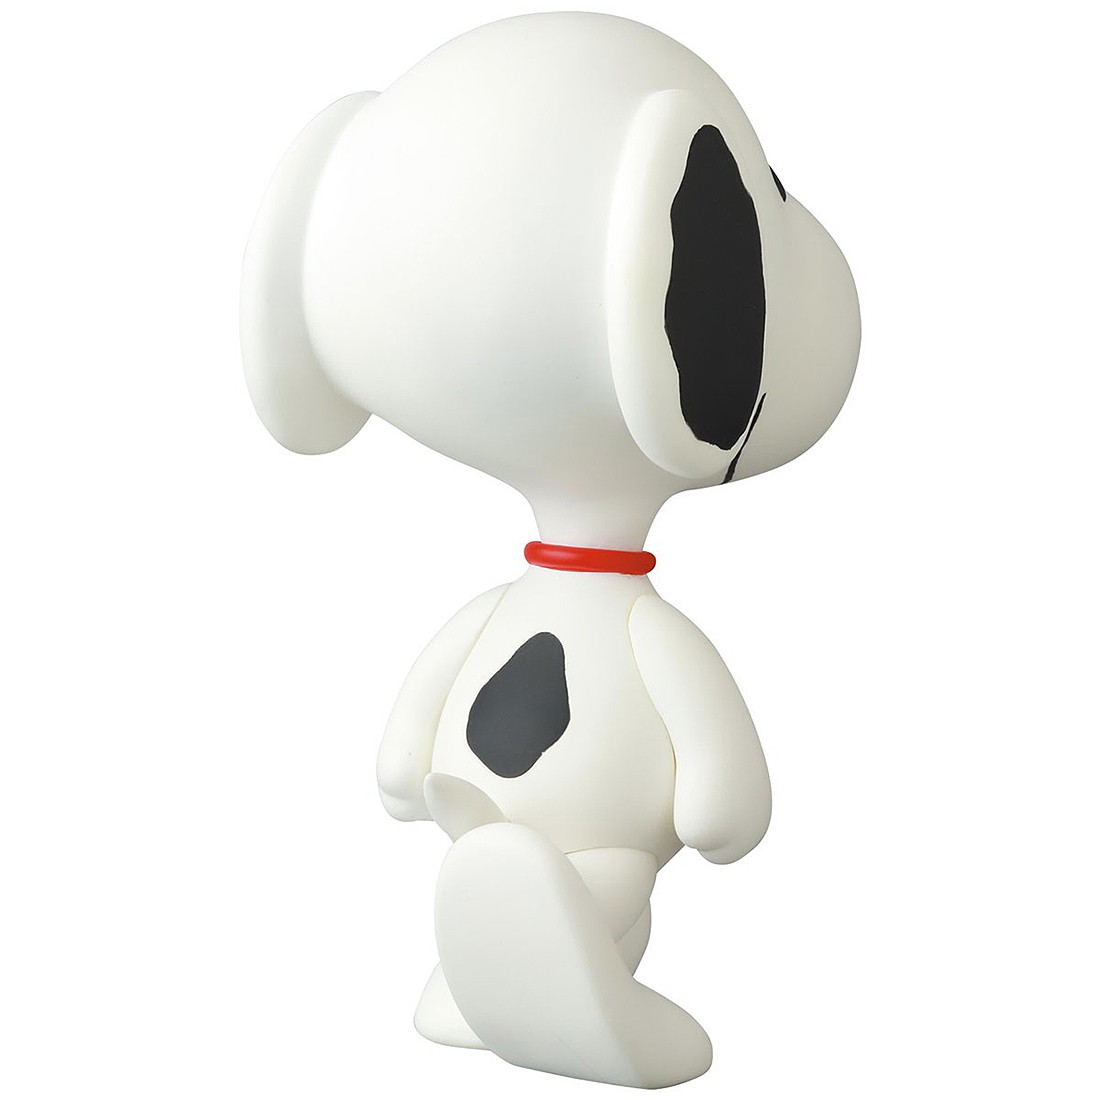 Medicom Peanuts VCD Snoopy And Woodstock 1997 Ver. Figure white